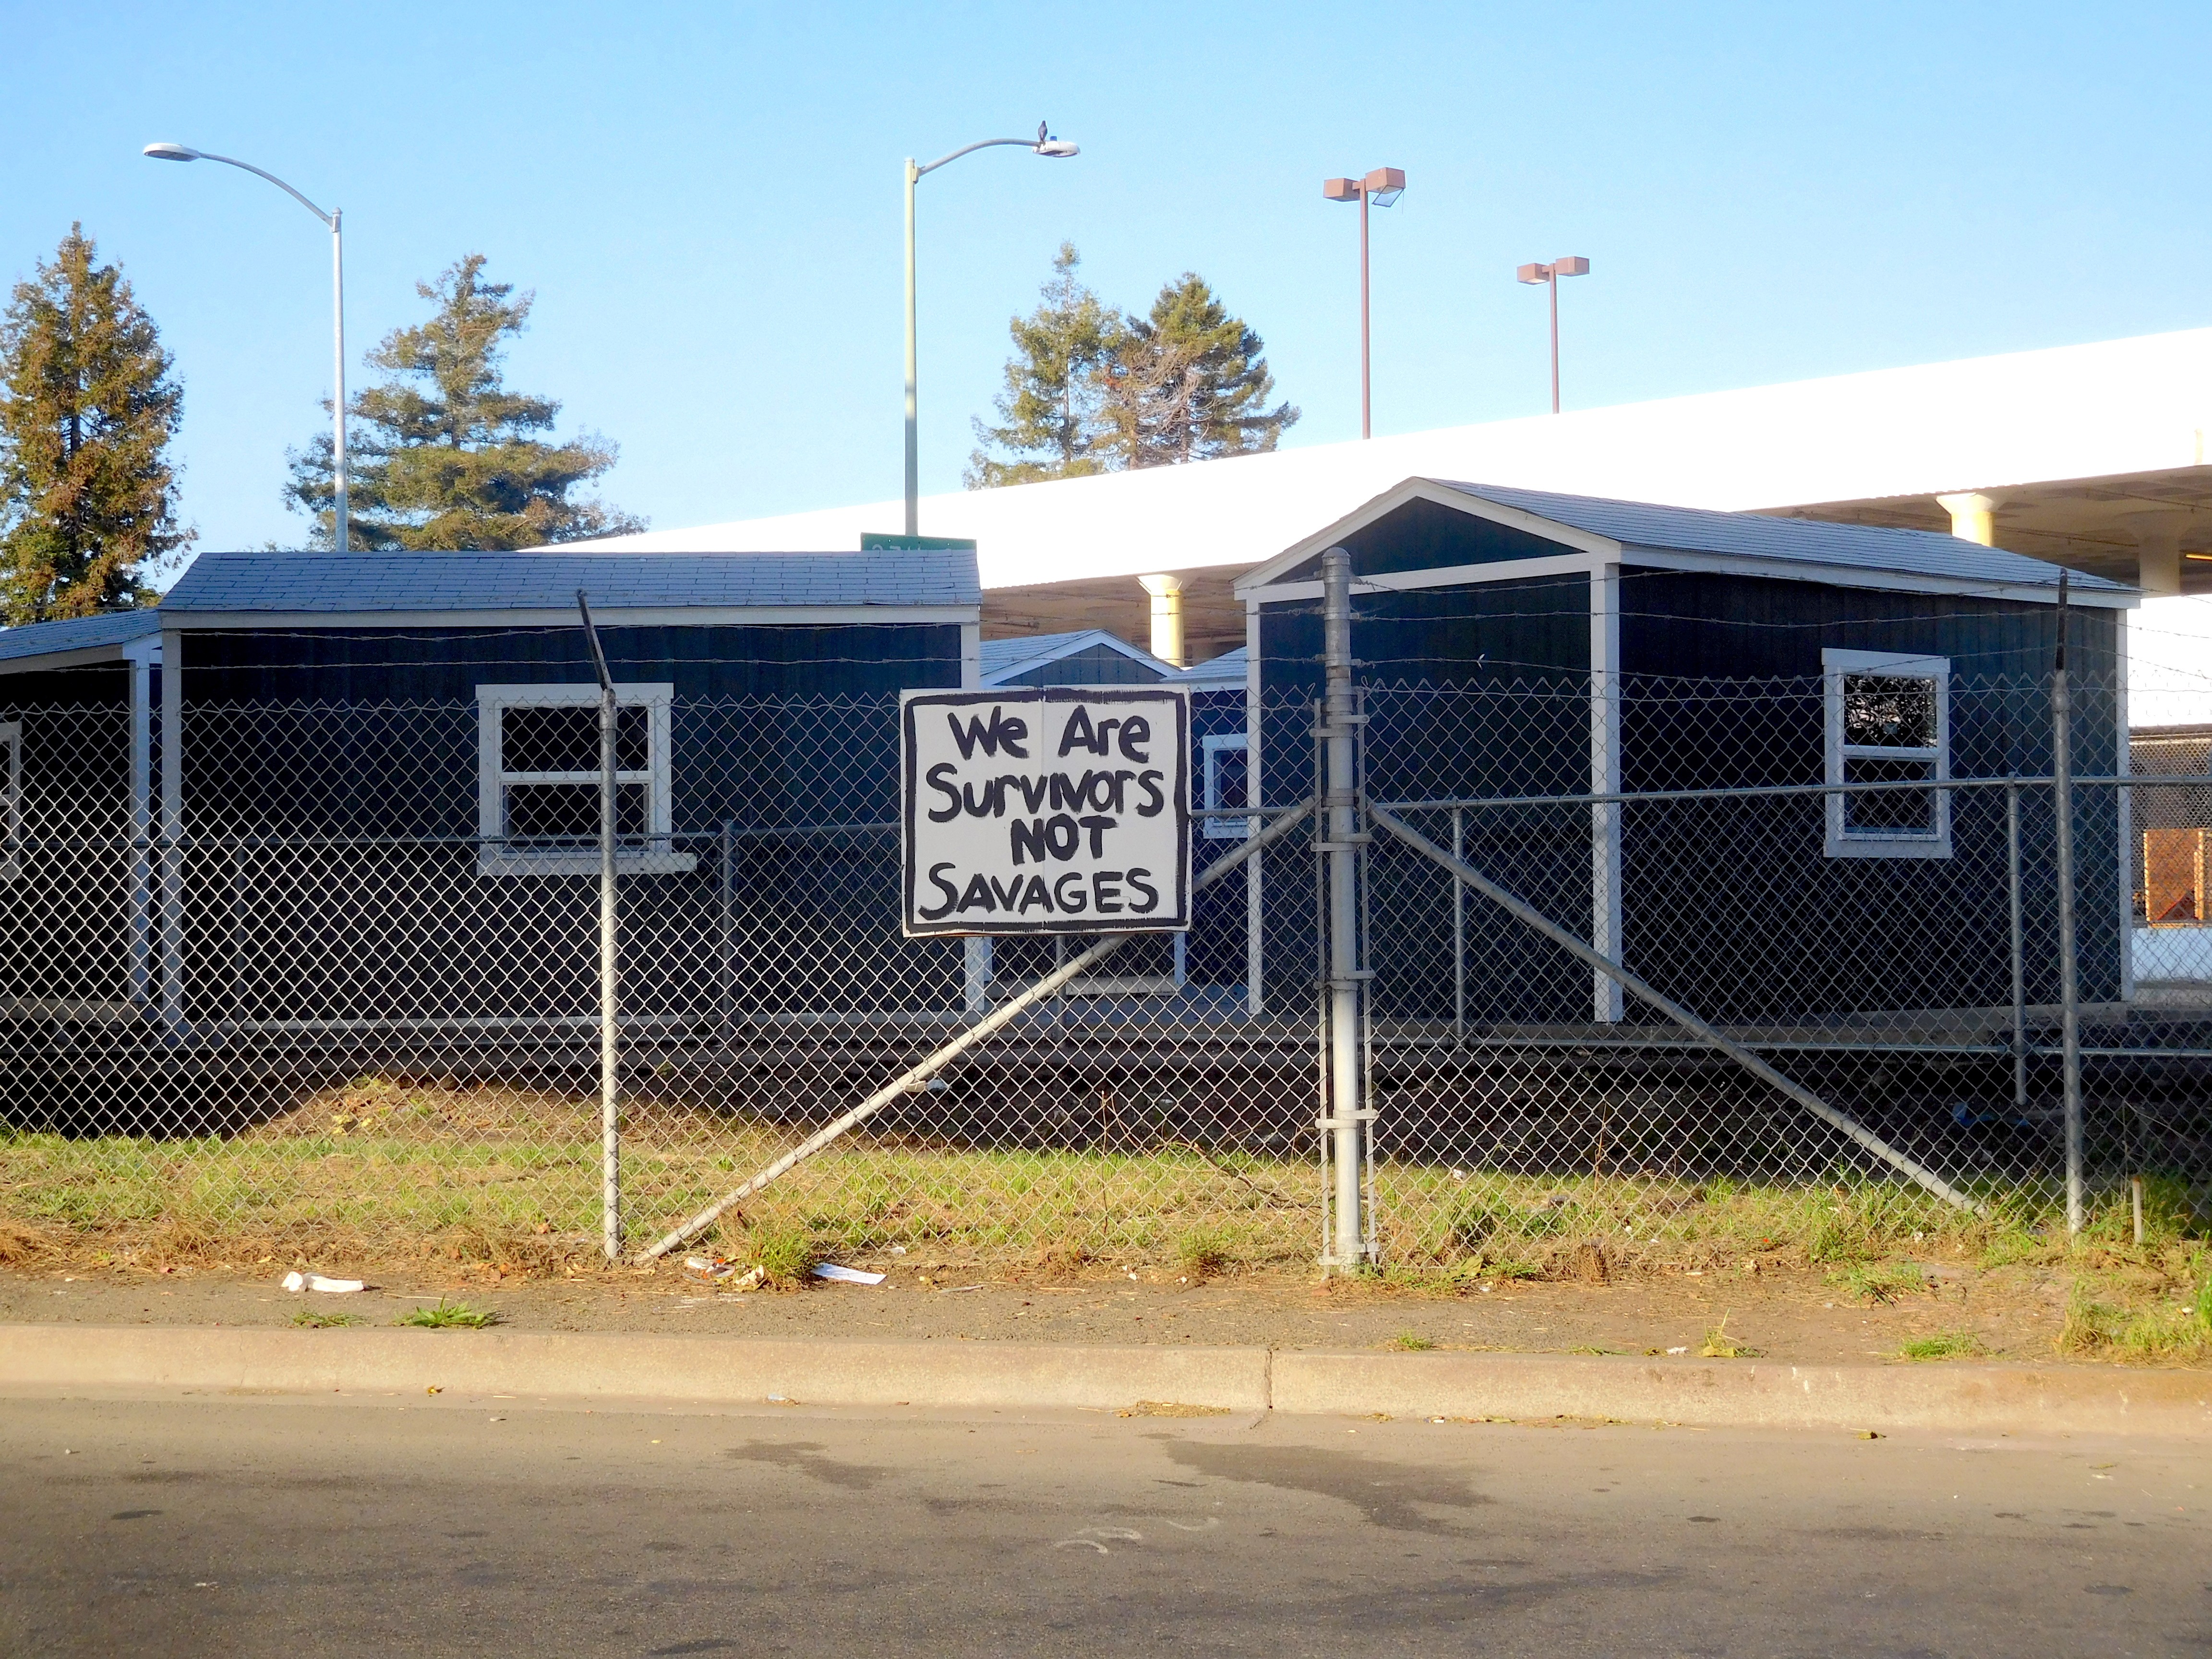 Second 'Tuff Shed' Homeless Camp Opens in Oakland, but 